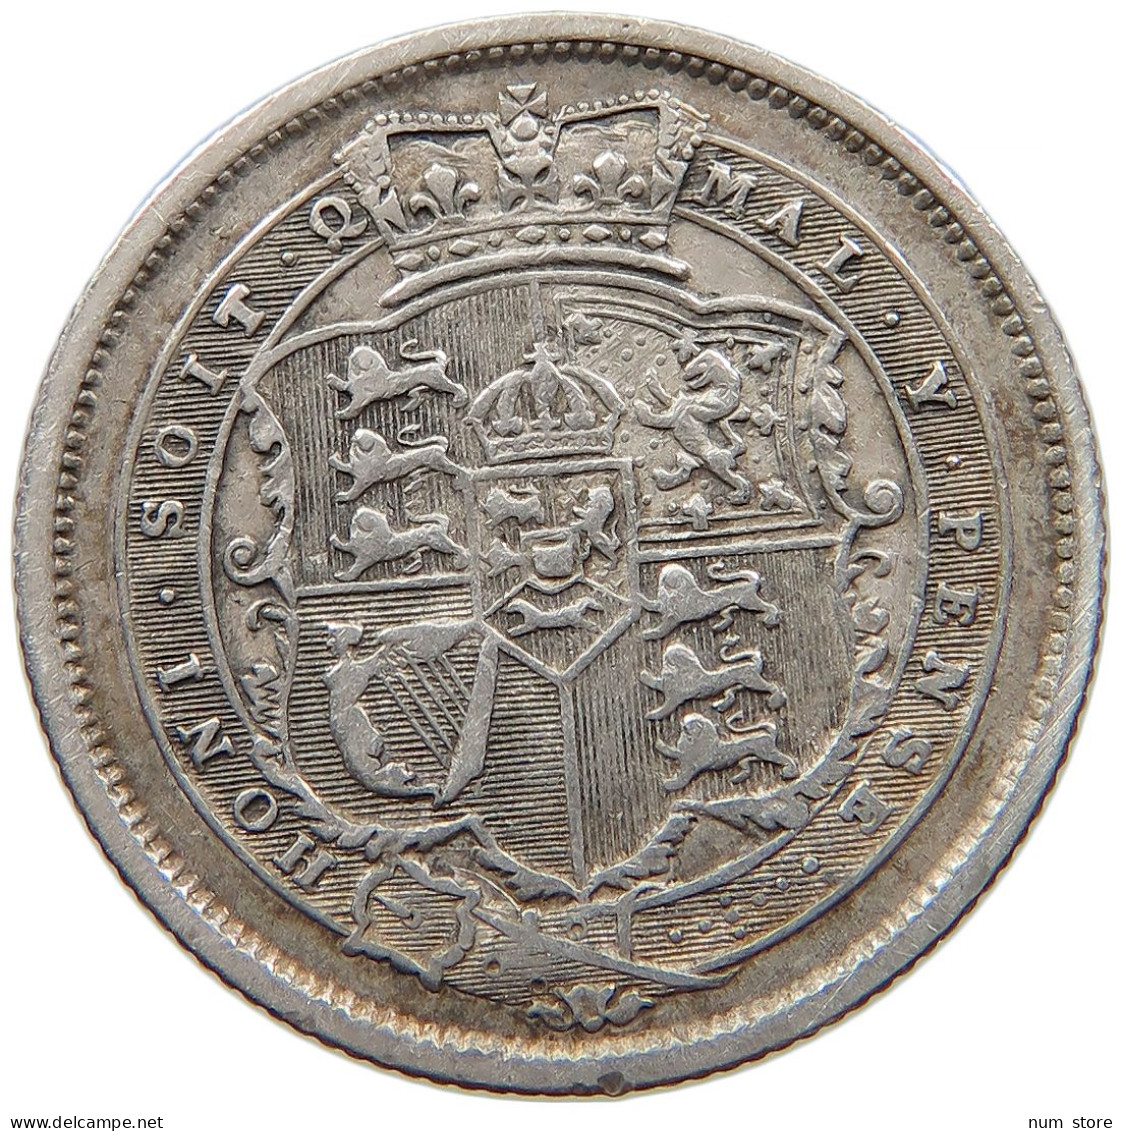 GREAT BRITAIN SHILLING 1819 Georg III. 1760-1820 #t021 0273 - I. 1 Shilling